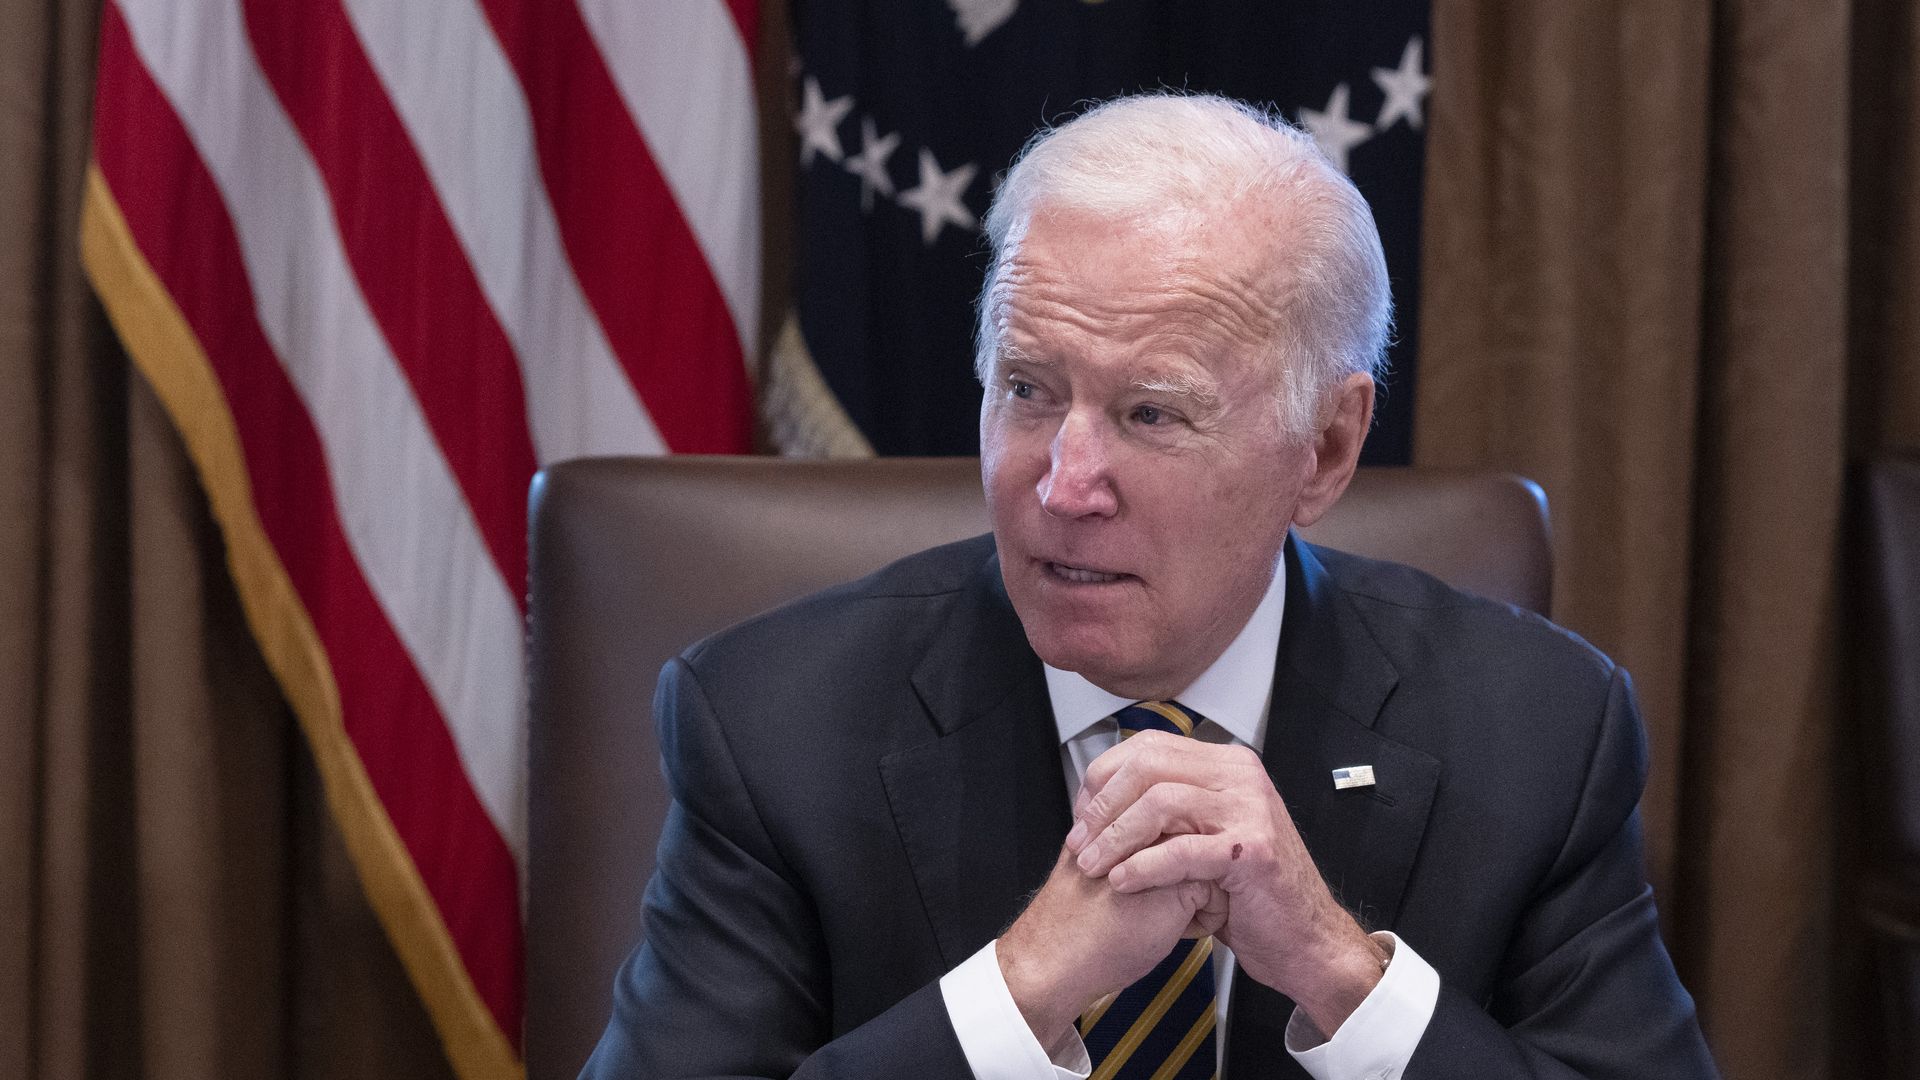 Photo of Joe Biden sitting at a table with his hands clasped in front of him as he looks to his right